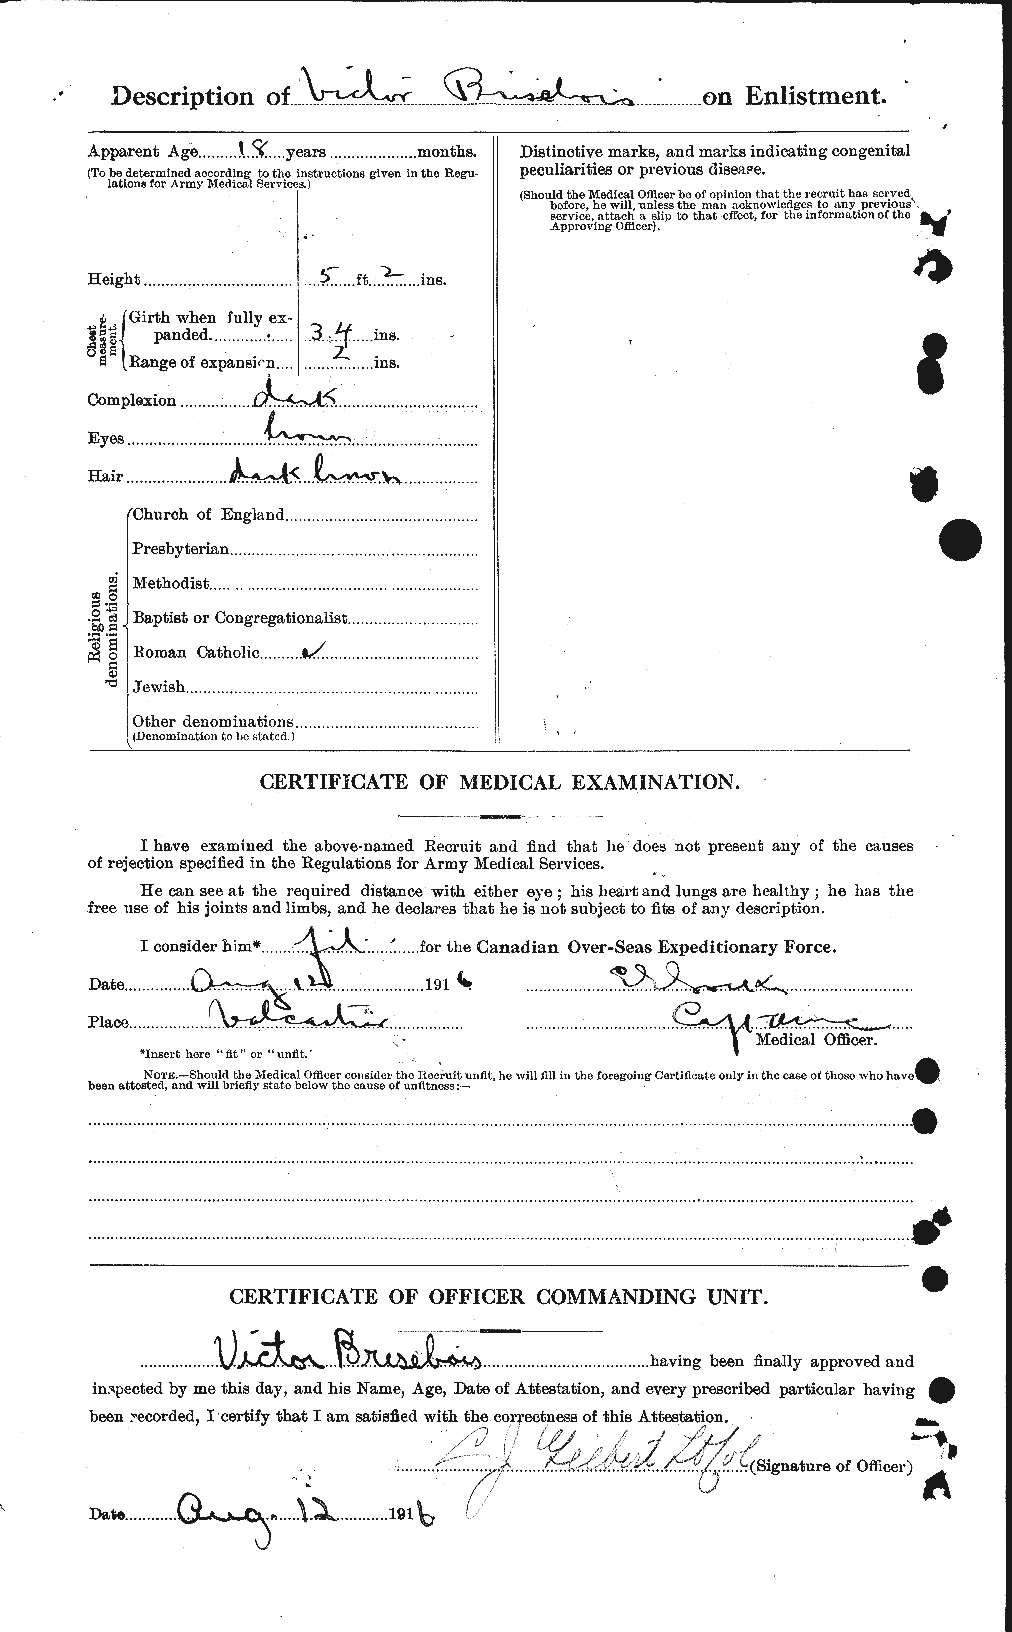 Personnel Records of the First World War - CEF 259449b